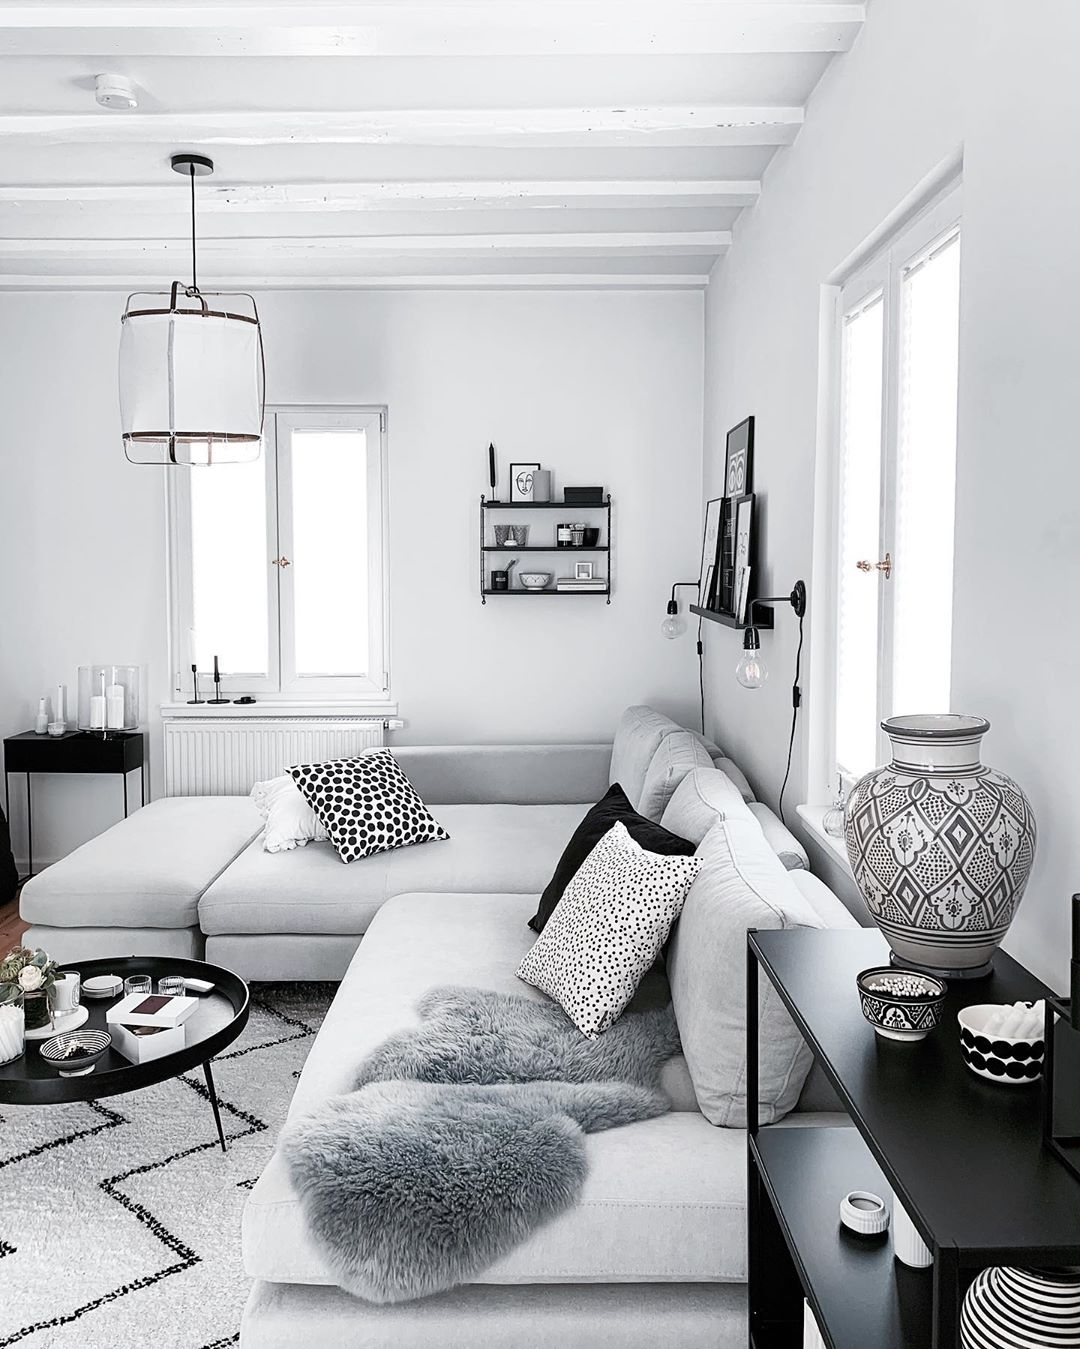 Light gray living room with gray couch and black decor. Photo by Instagram user @froehlicheszuhause